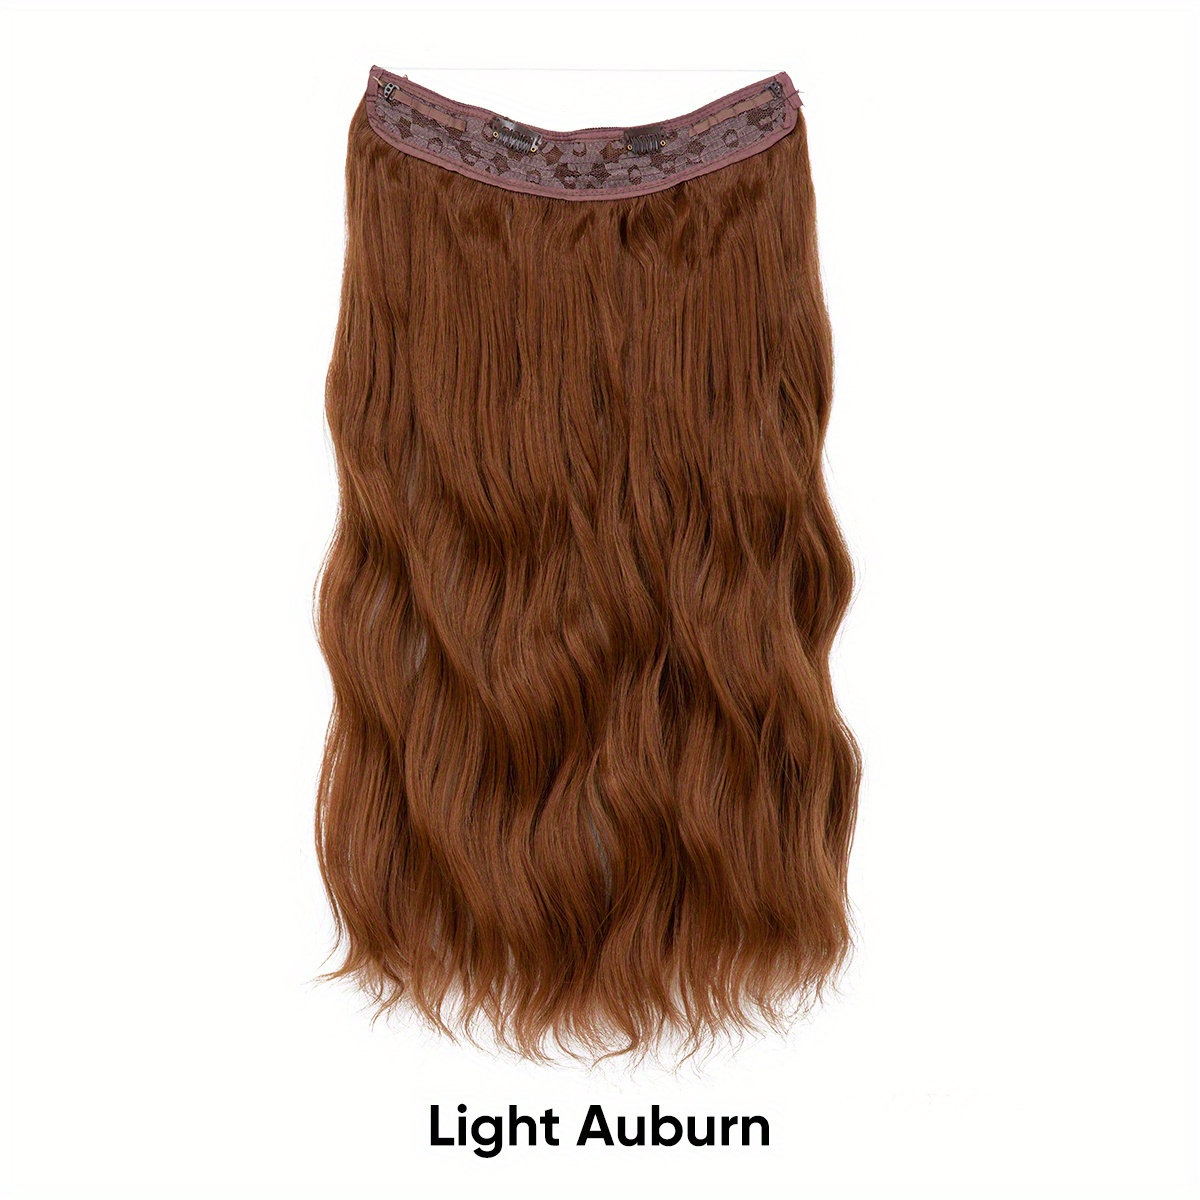 HOOJIH Wire Hair Extensions 2 Ways Adjustable Headband Size Curly Wavy Invisible  Wire Hair Extensions Hairpiece 20 Inch 140 Gram for Women - Dark Brown  price in Saudi Arabia,  Saudi Arabia